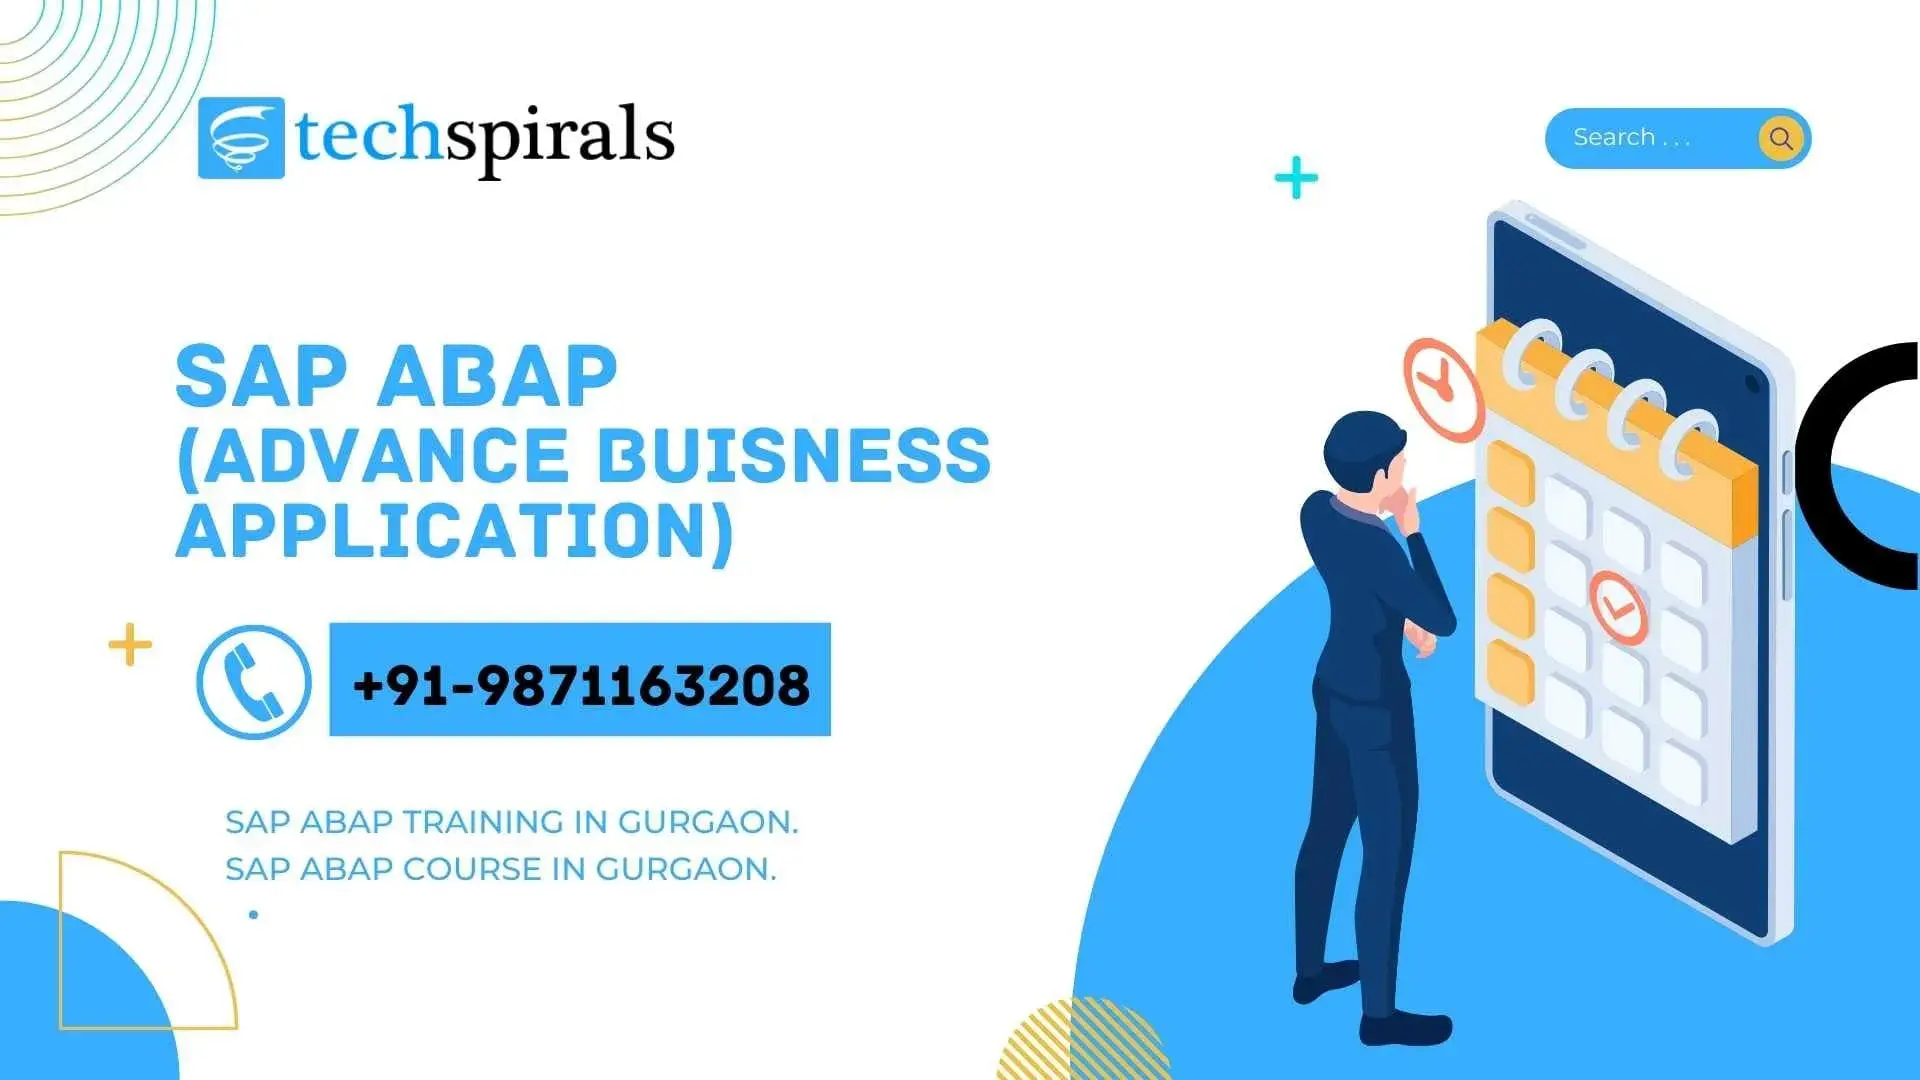 Get Potential With SAP ABAP Training In Gurgaon - Expert Advice